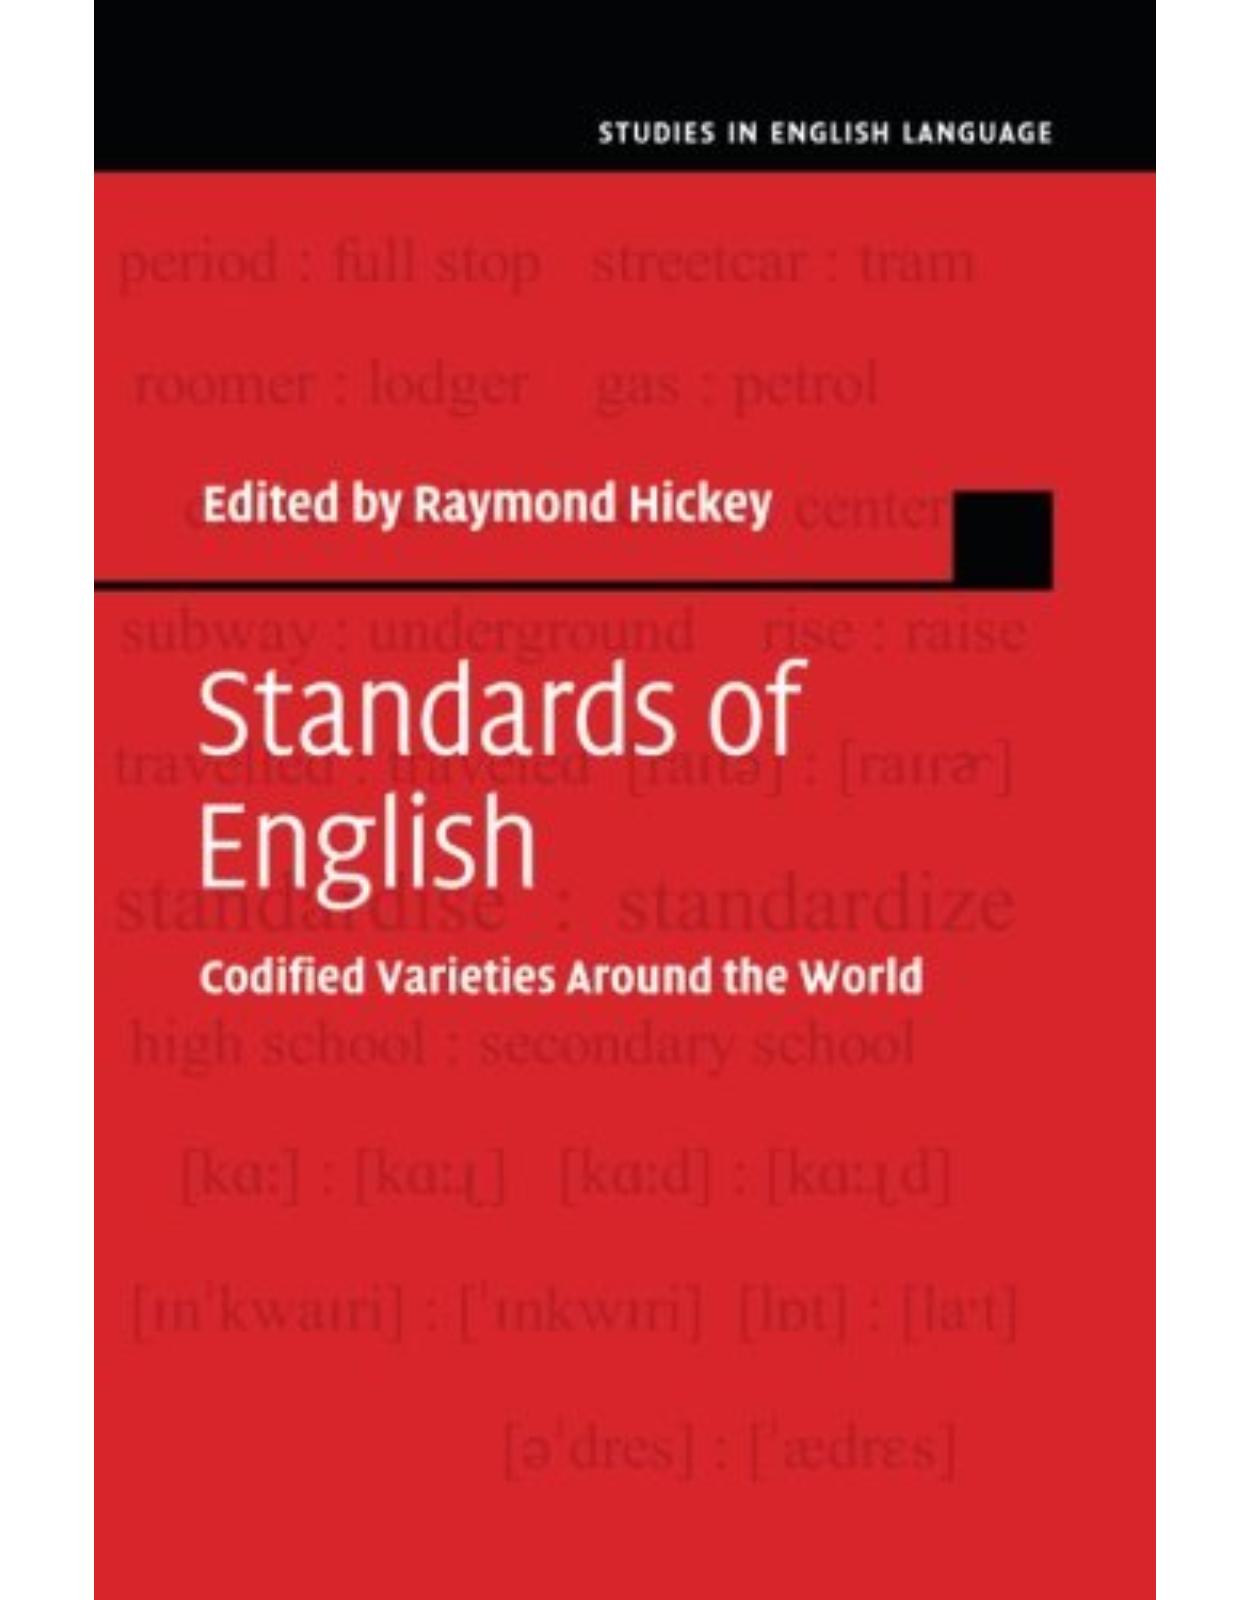 Standards of English: Codified Varieties around the World (Studies in English Language) 